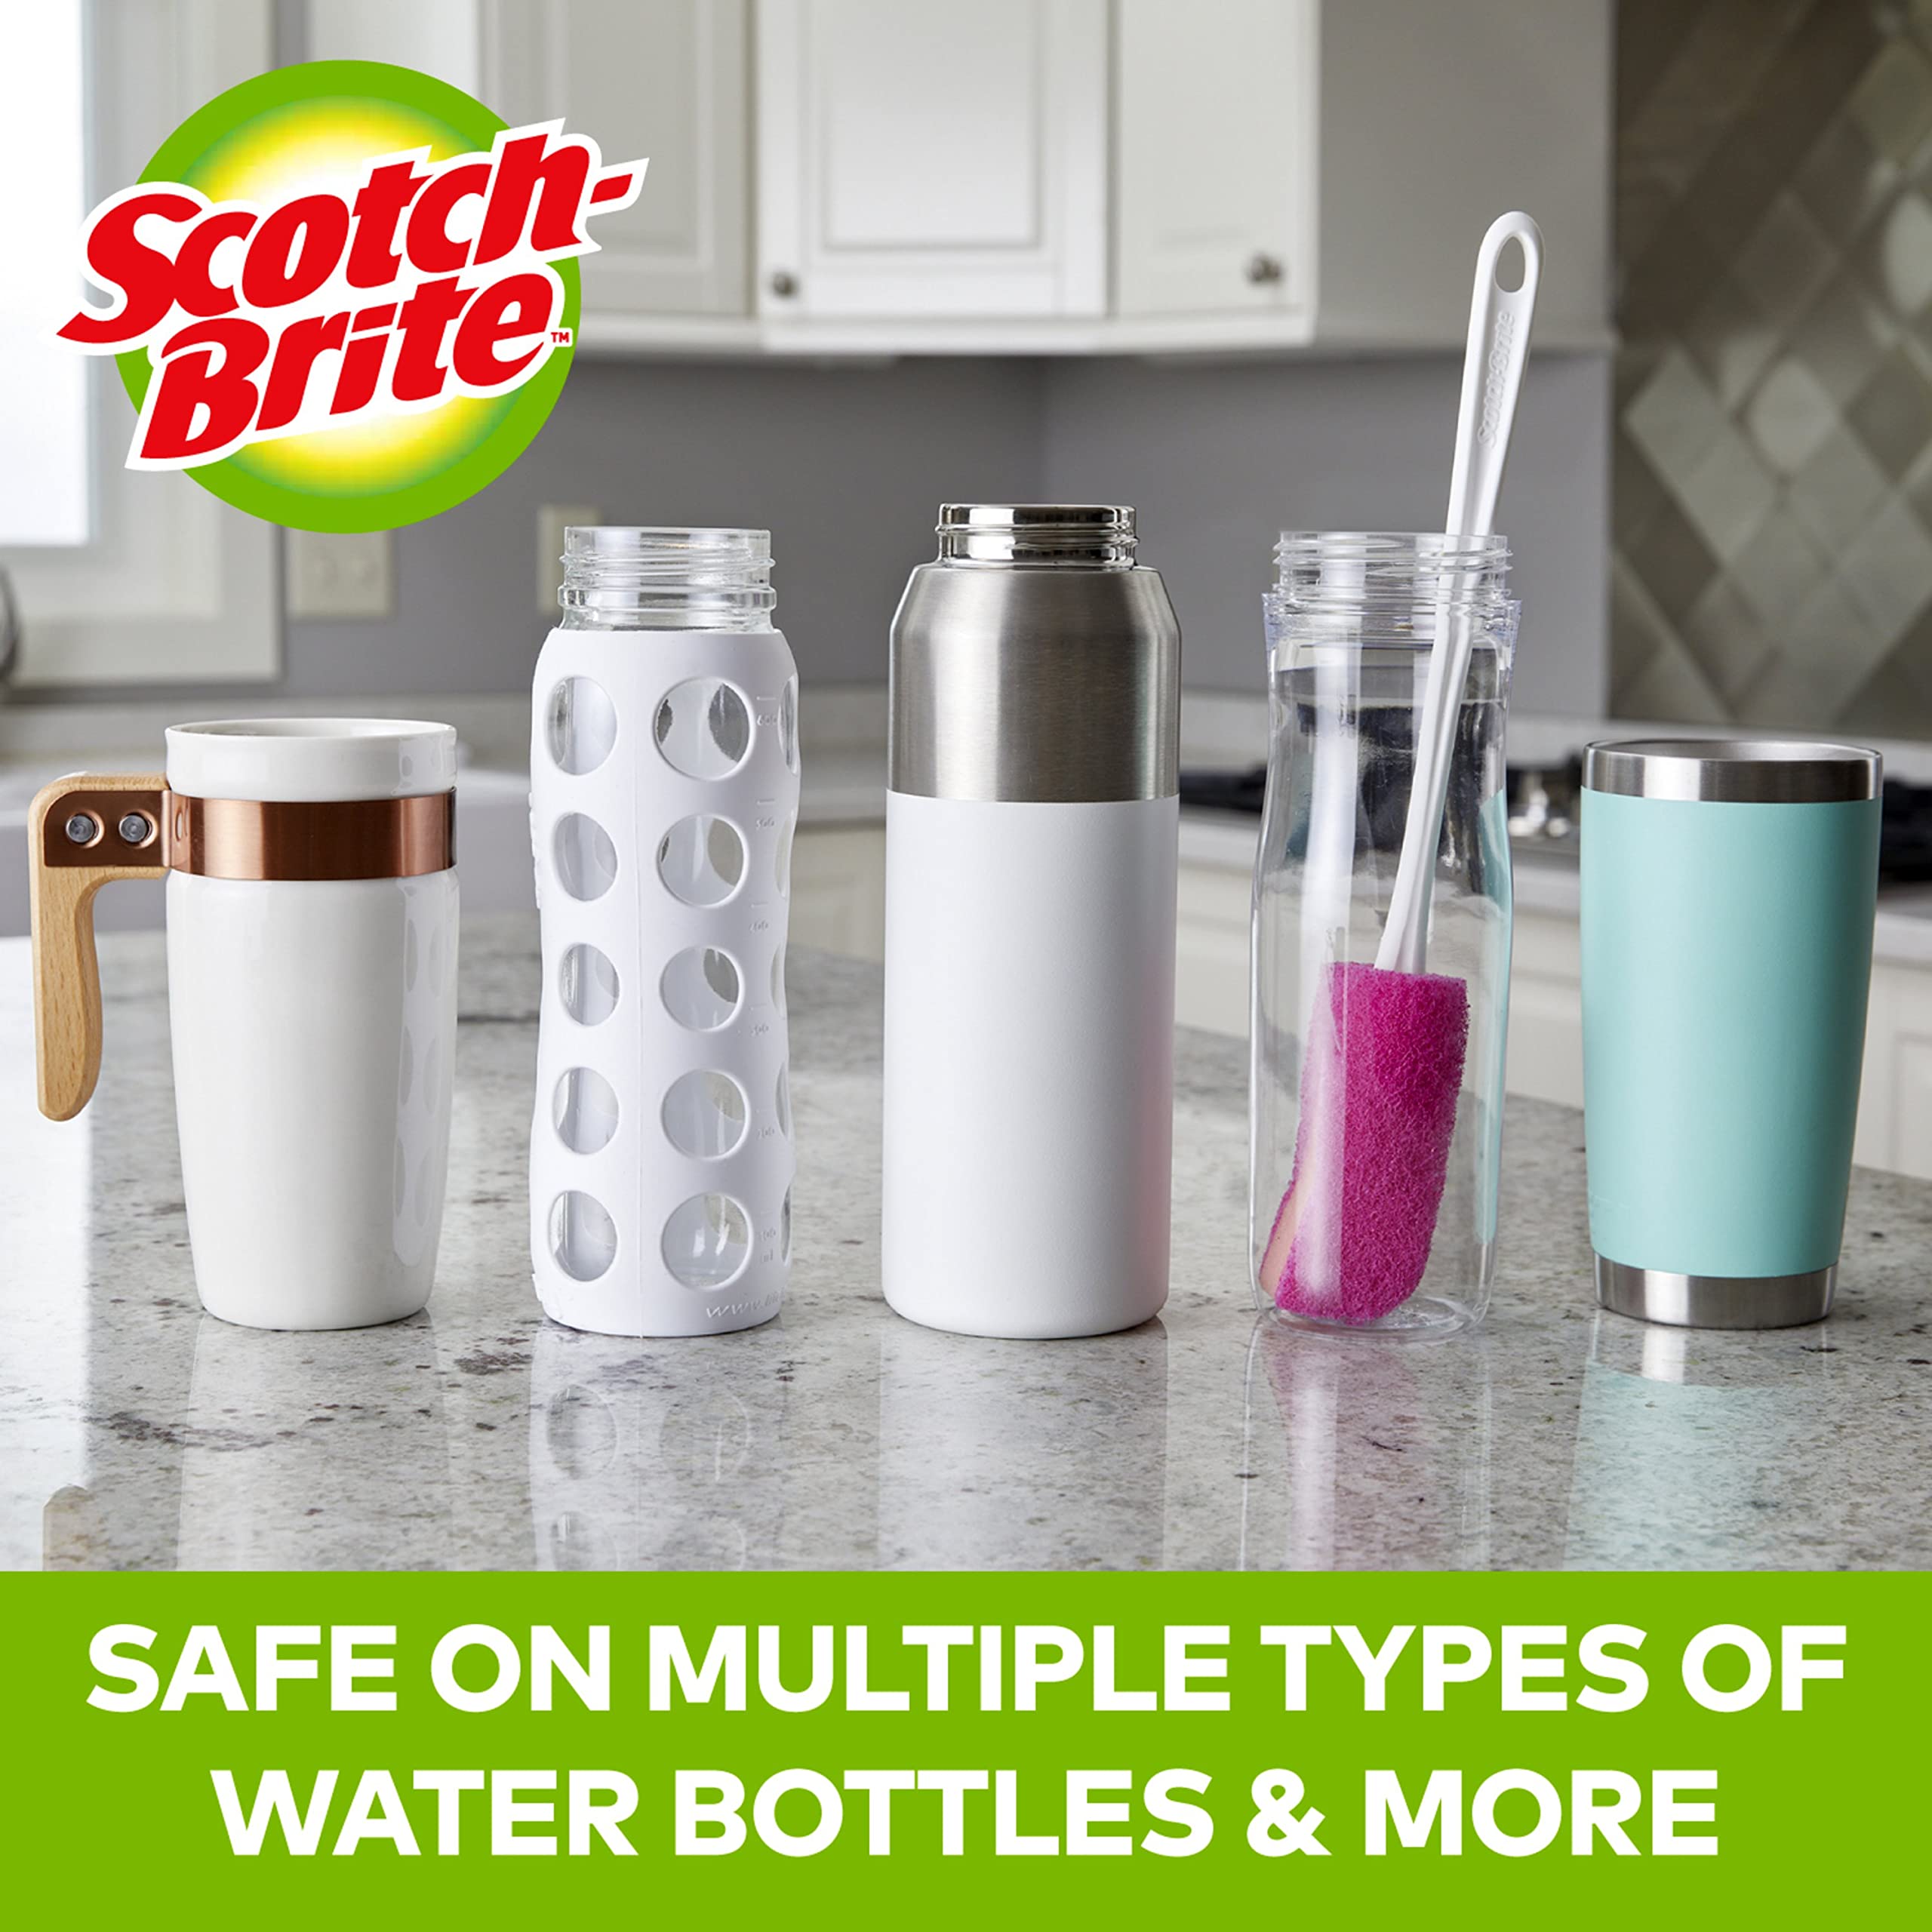 Scotch-Brite Water Bottle Scrubber, Safe On Glass, Plastic and Stainless Steel